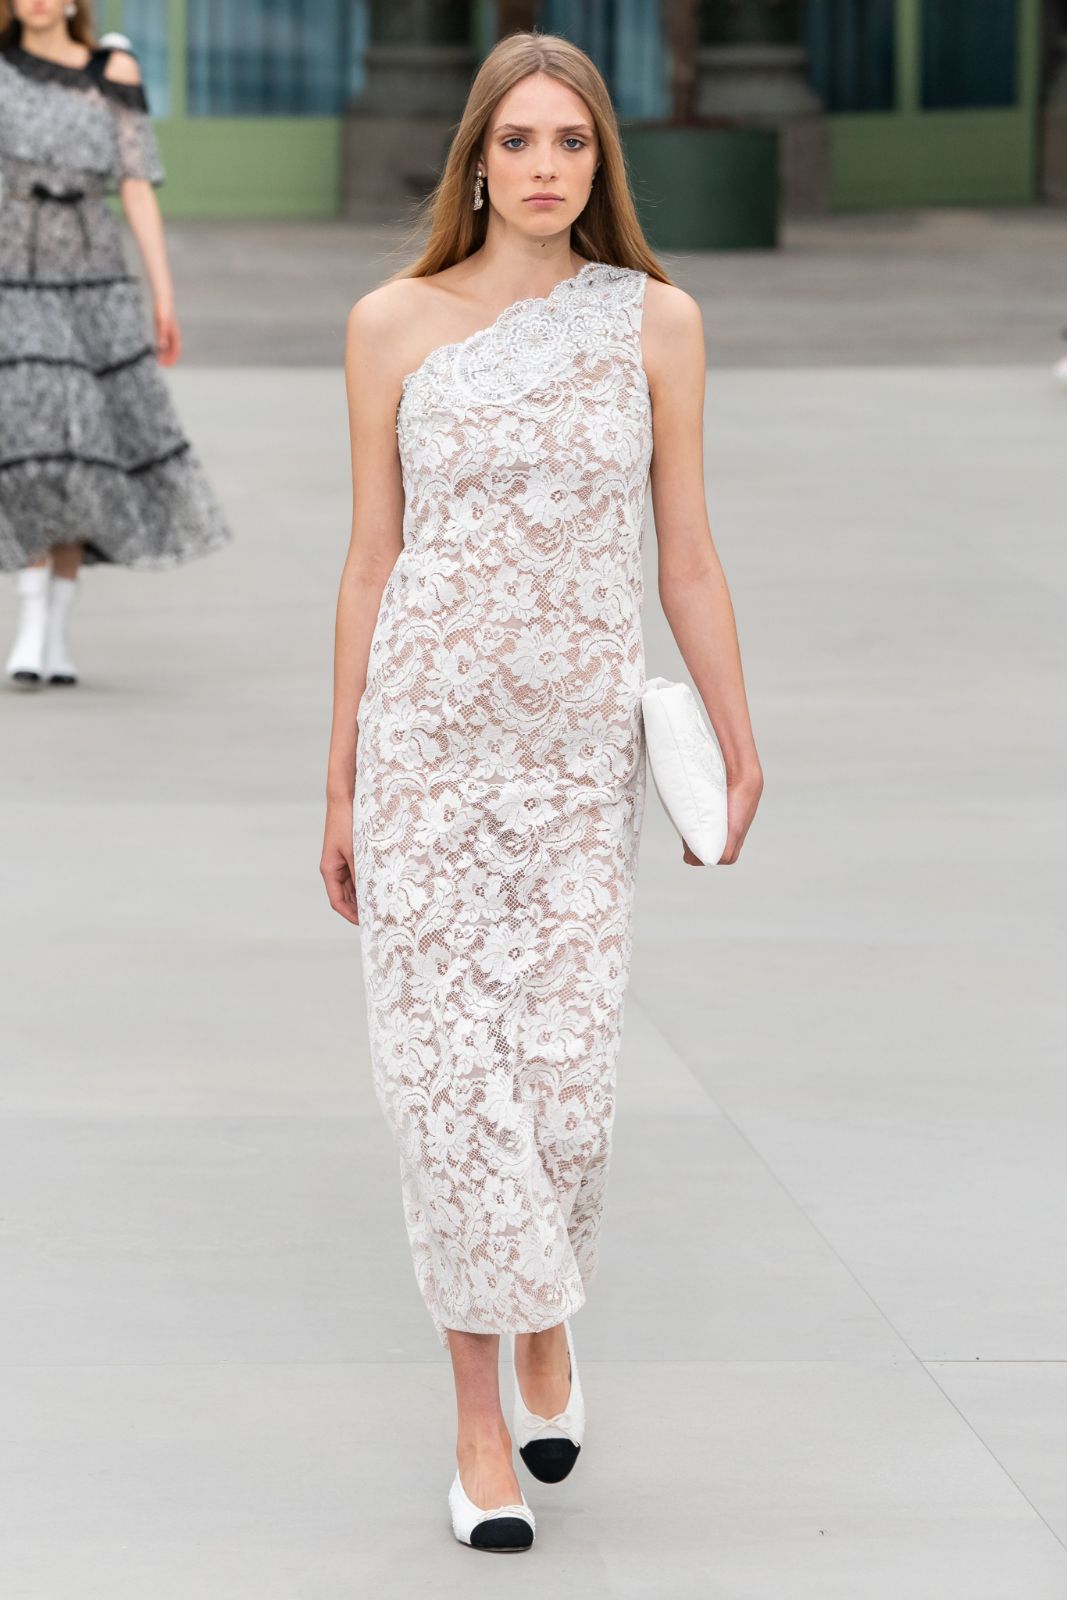 Chanel Debuts Virginie Viard’s First Solo Collection for Resort 2020 ...